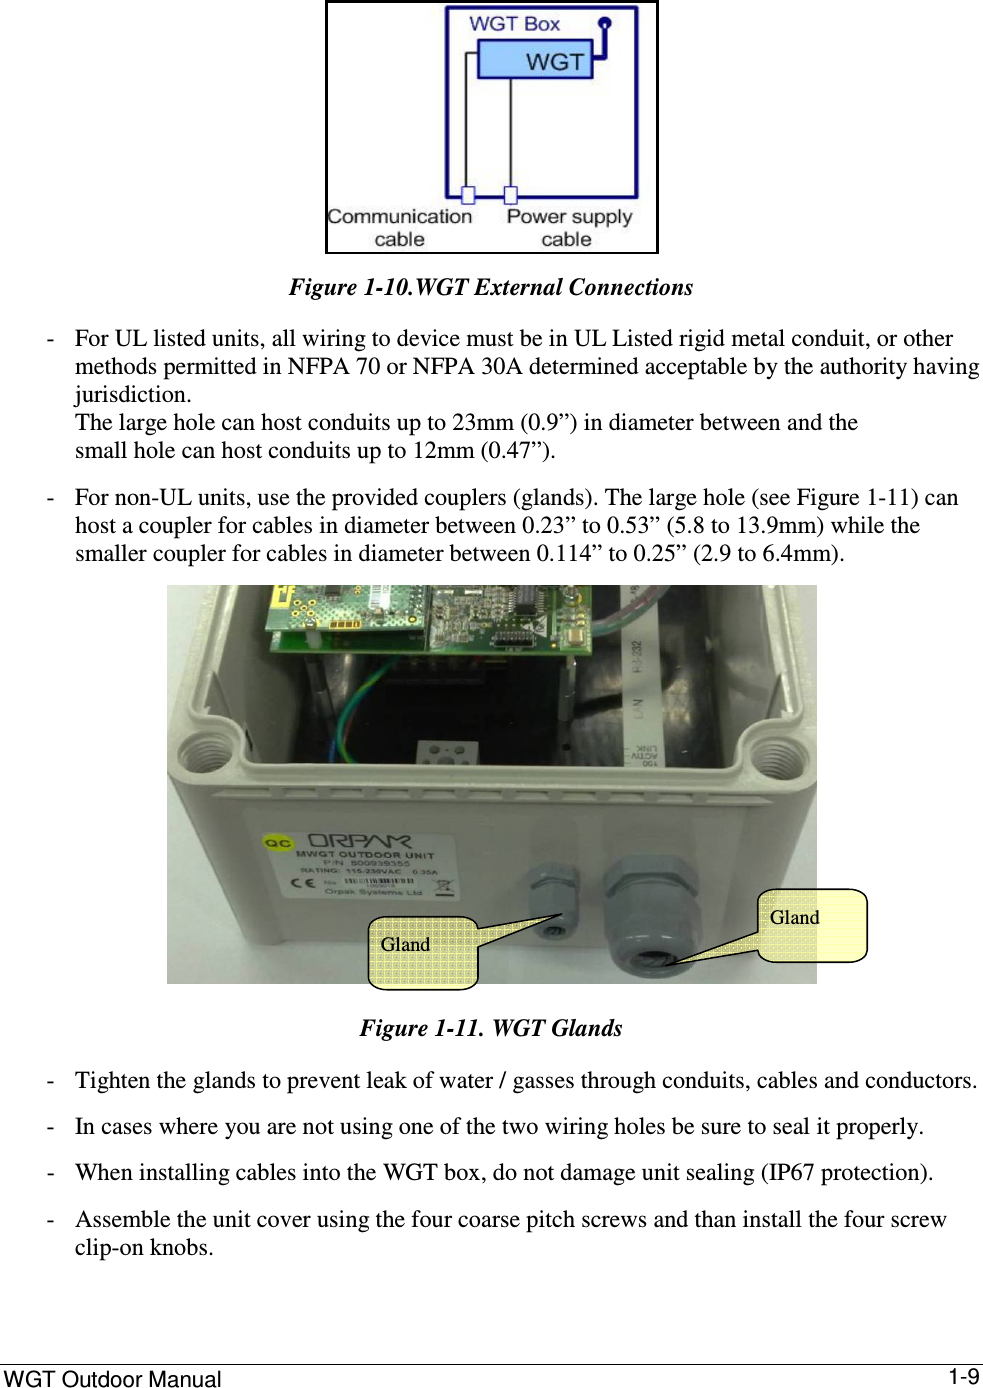 WGT Outdoor Manual      1-9   Figure  1-10.WGT External Connections - For UL listed units, all wiring to device must be in UL Listed rigid metal conduit, or other methods permitted in NFPA 70 or NFPA 30A determined acceptable by the authority having jurisdiction.  The large hole can host conduits up to 23mm (0.9”) in diameter between and the  small hole can host conduits up to 12mm (0.47”). - For non-UL units, use the provided couplers (glands). The large hole (see Figure  1-11) can  host a coupler for cables in diameter between 0.23” to 0.53” (5.8 to 13.9mm) while the  smaller coupler for cables in diameter between 0.114” to 0.25” (2.9 to 6.4mm).  Figure  1-11. WGT Glands - Tighten the glands to prevent leak of water / gasses through conduits, cables and conductors. - In cases where you are not using one of the two wiring holes be sure to seal it properly. - When installing cables into the WGT box, do not damage unit sealing (IP67 protection). - Assemble the unit cover using the four coarse pitch screws and than install the four screw clip-on knobs. Gland  Gland  